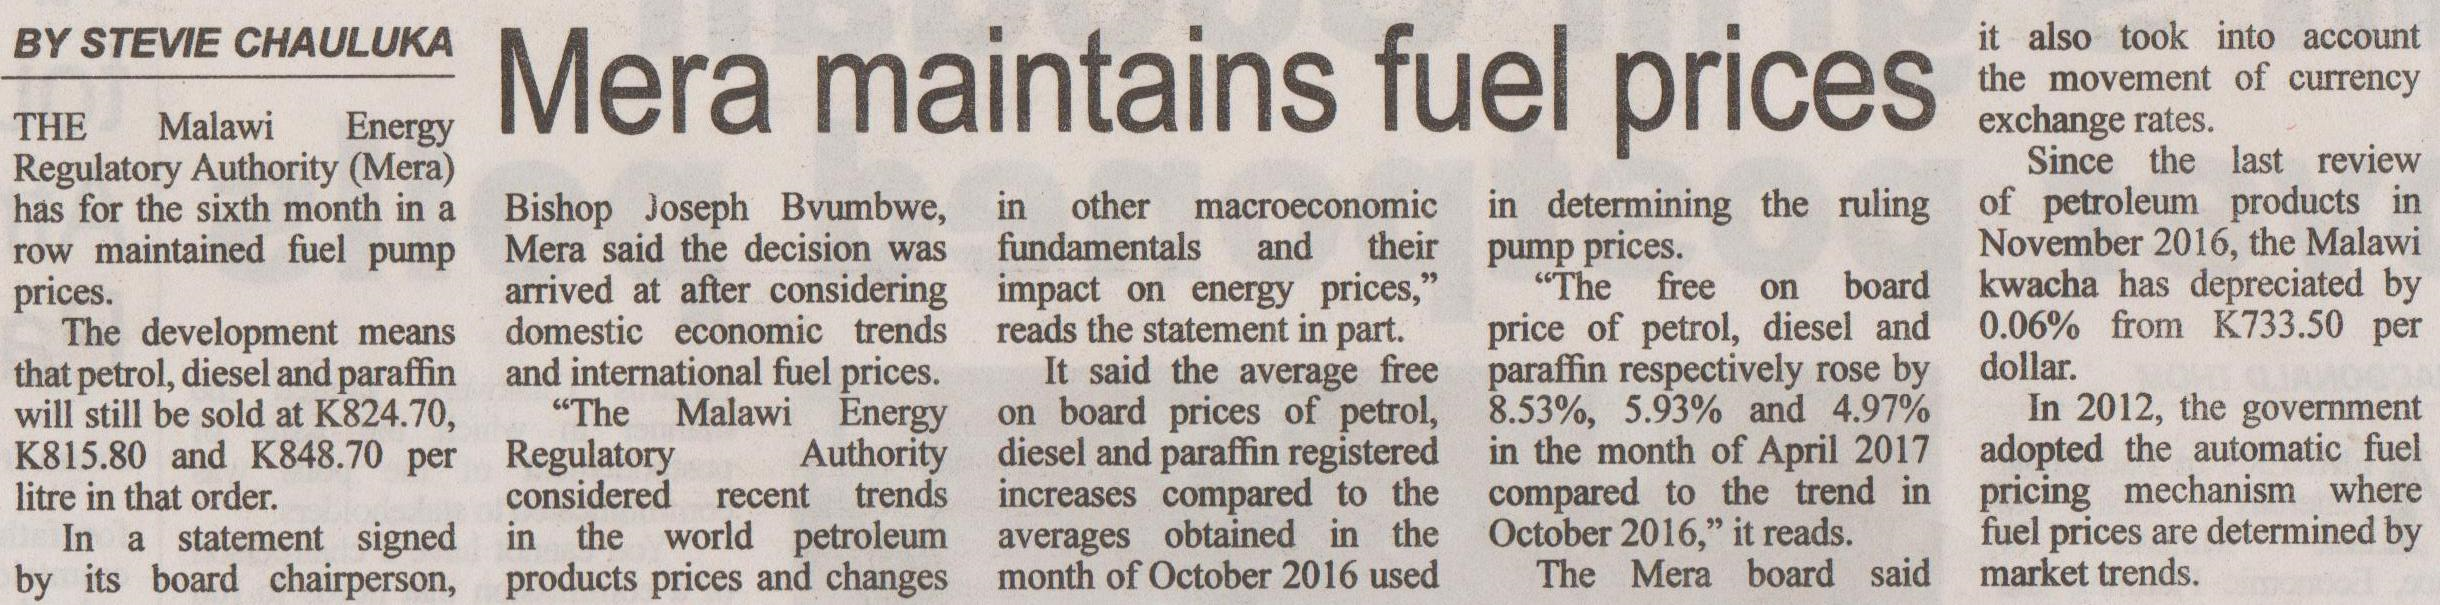 MERA Maintains Fuel Prices_Daily Times_May 10, 2017.png